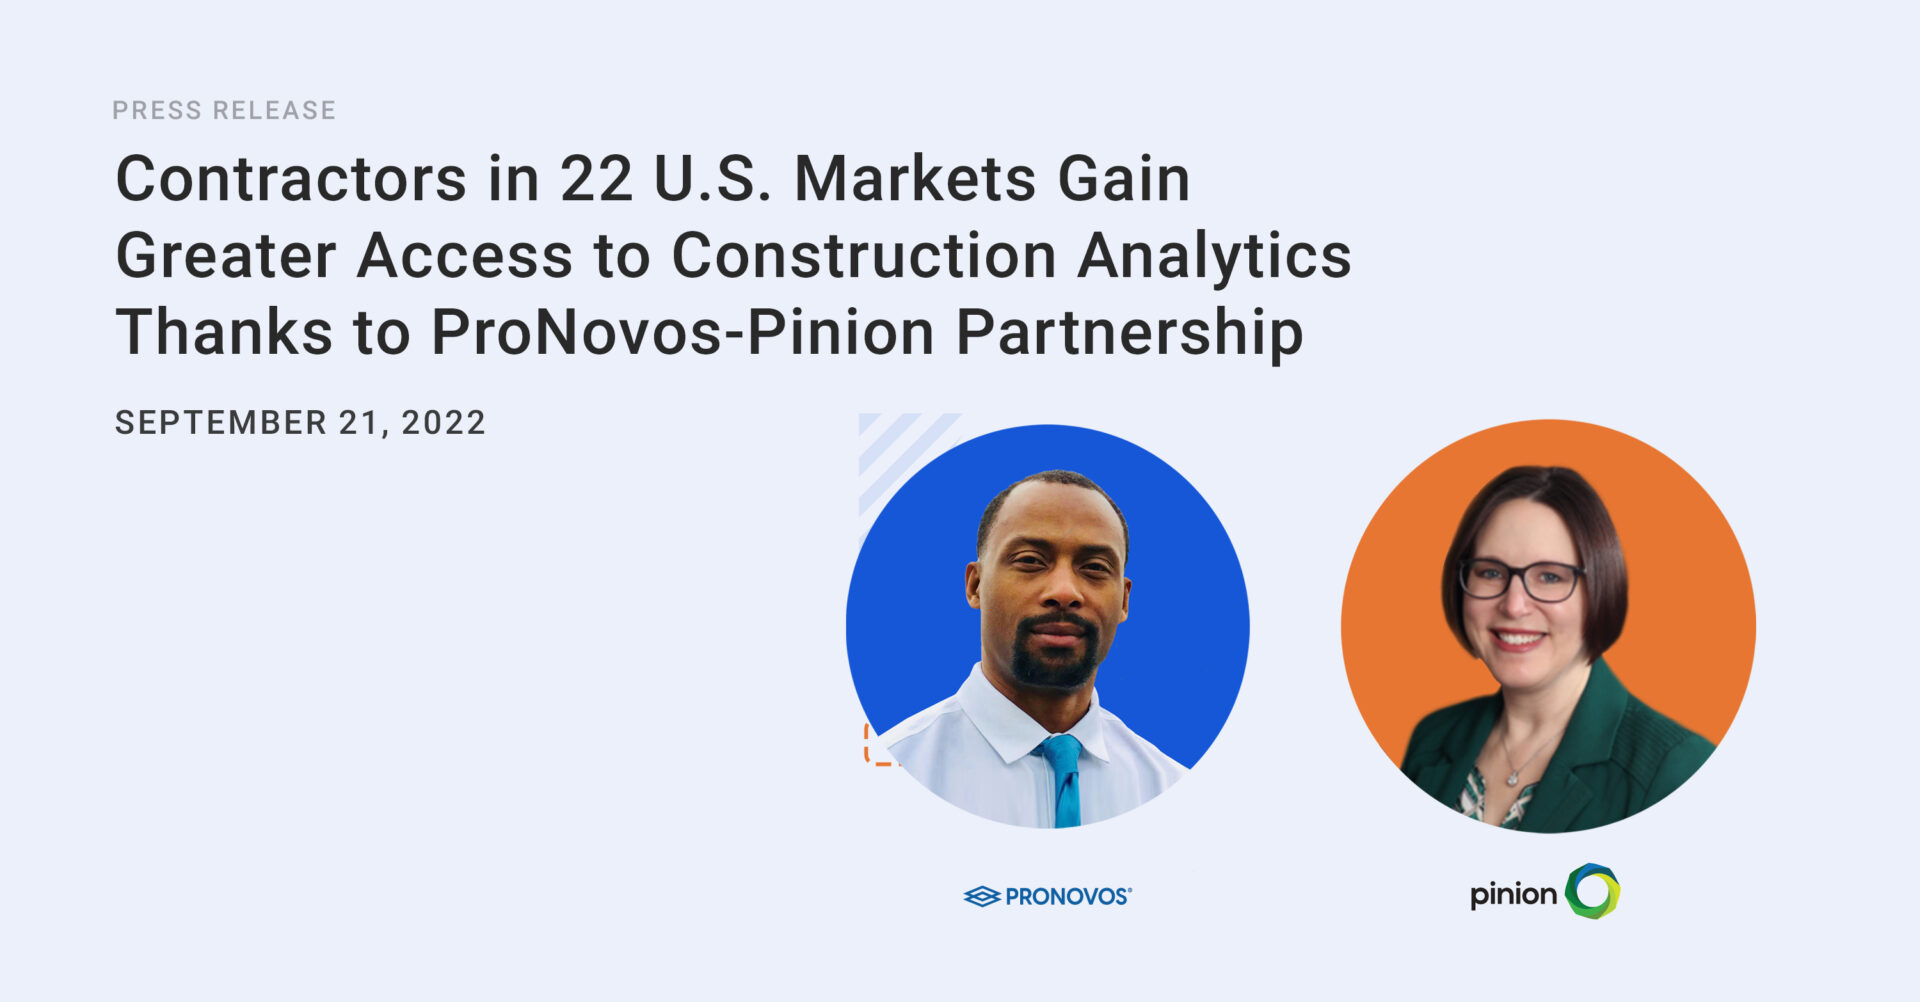 Contractors in 22 U.S. Markets Gain Greater Access to Construction Analytics Thanks to ProNovos-Pinion Partnership